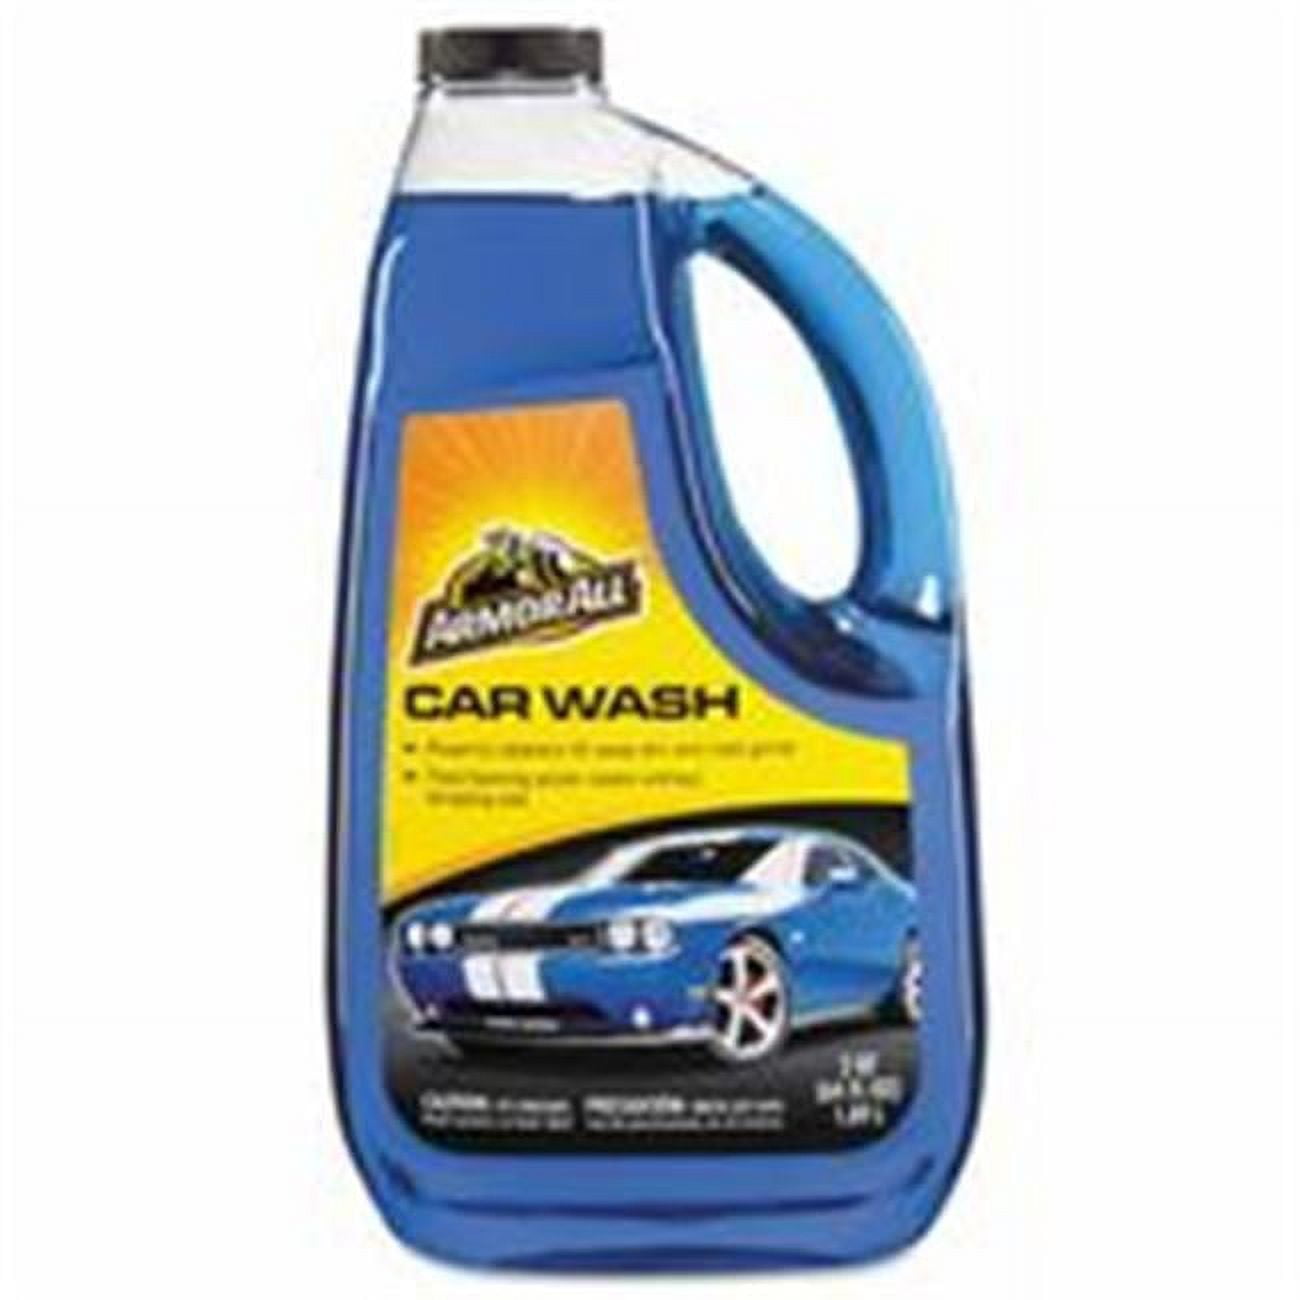 Leather Care and Car Cleaning Wipes (2 - 30-Count)